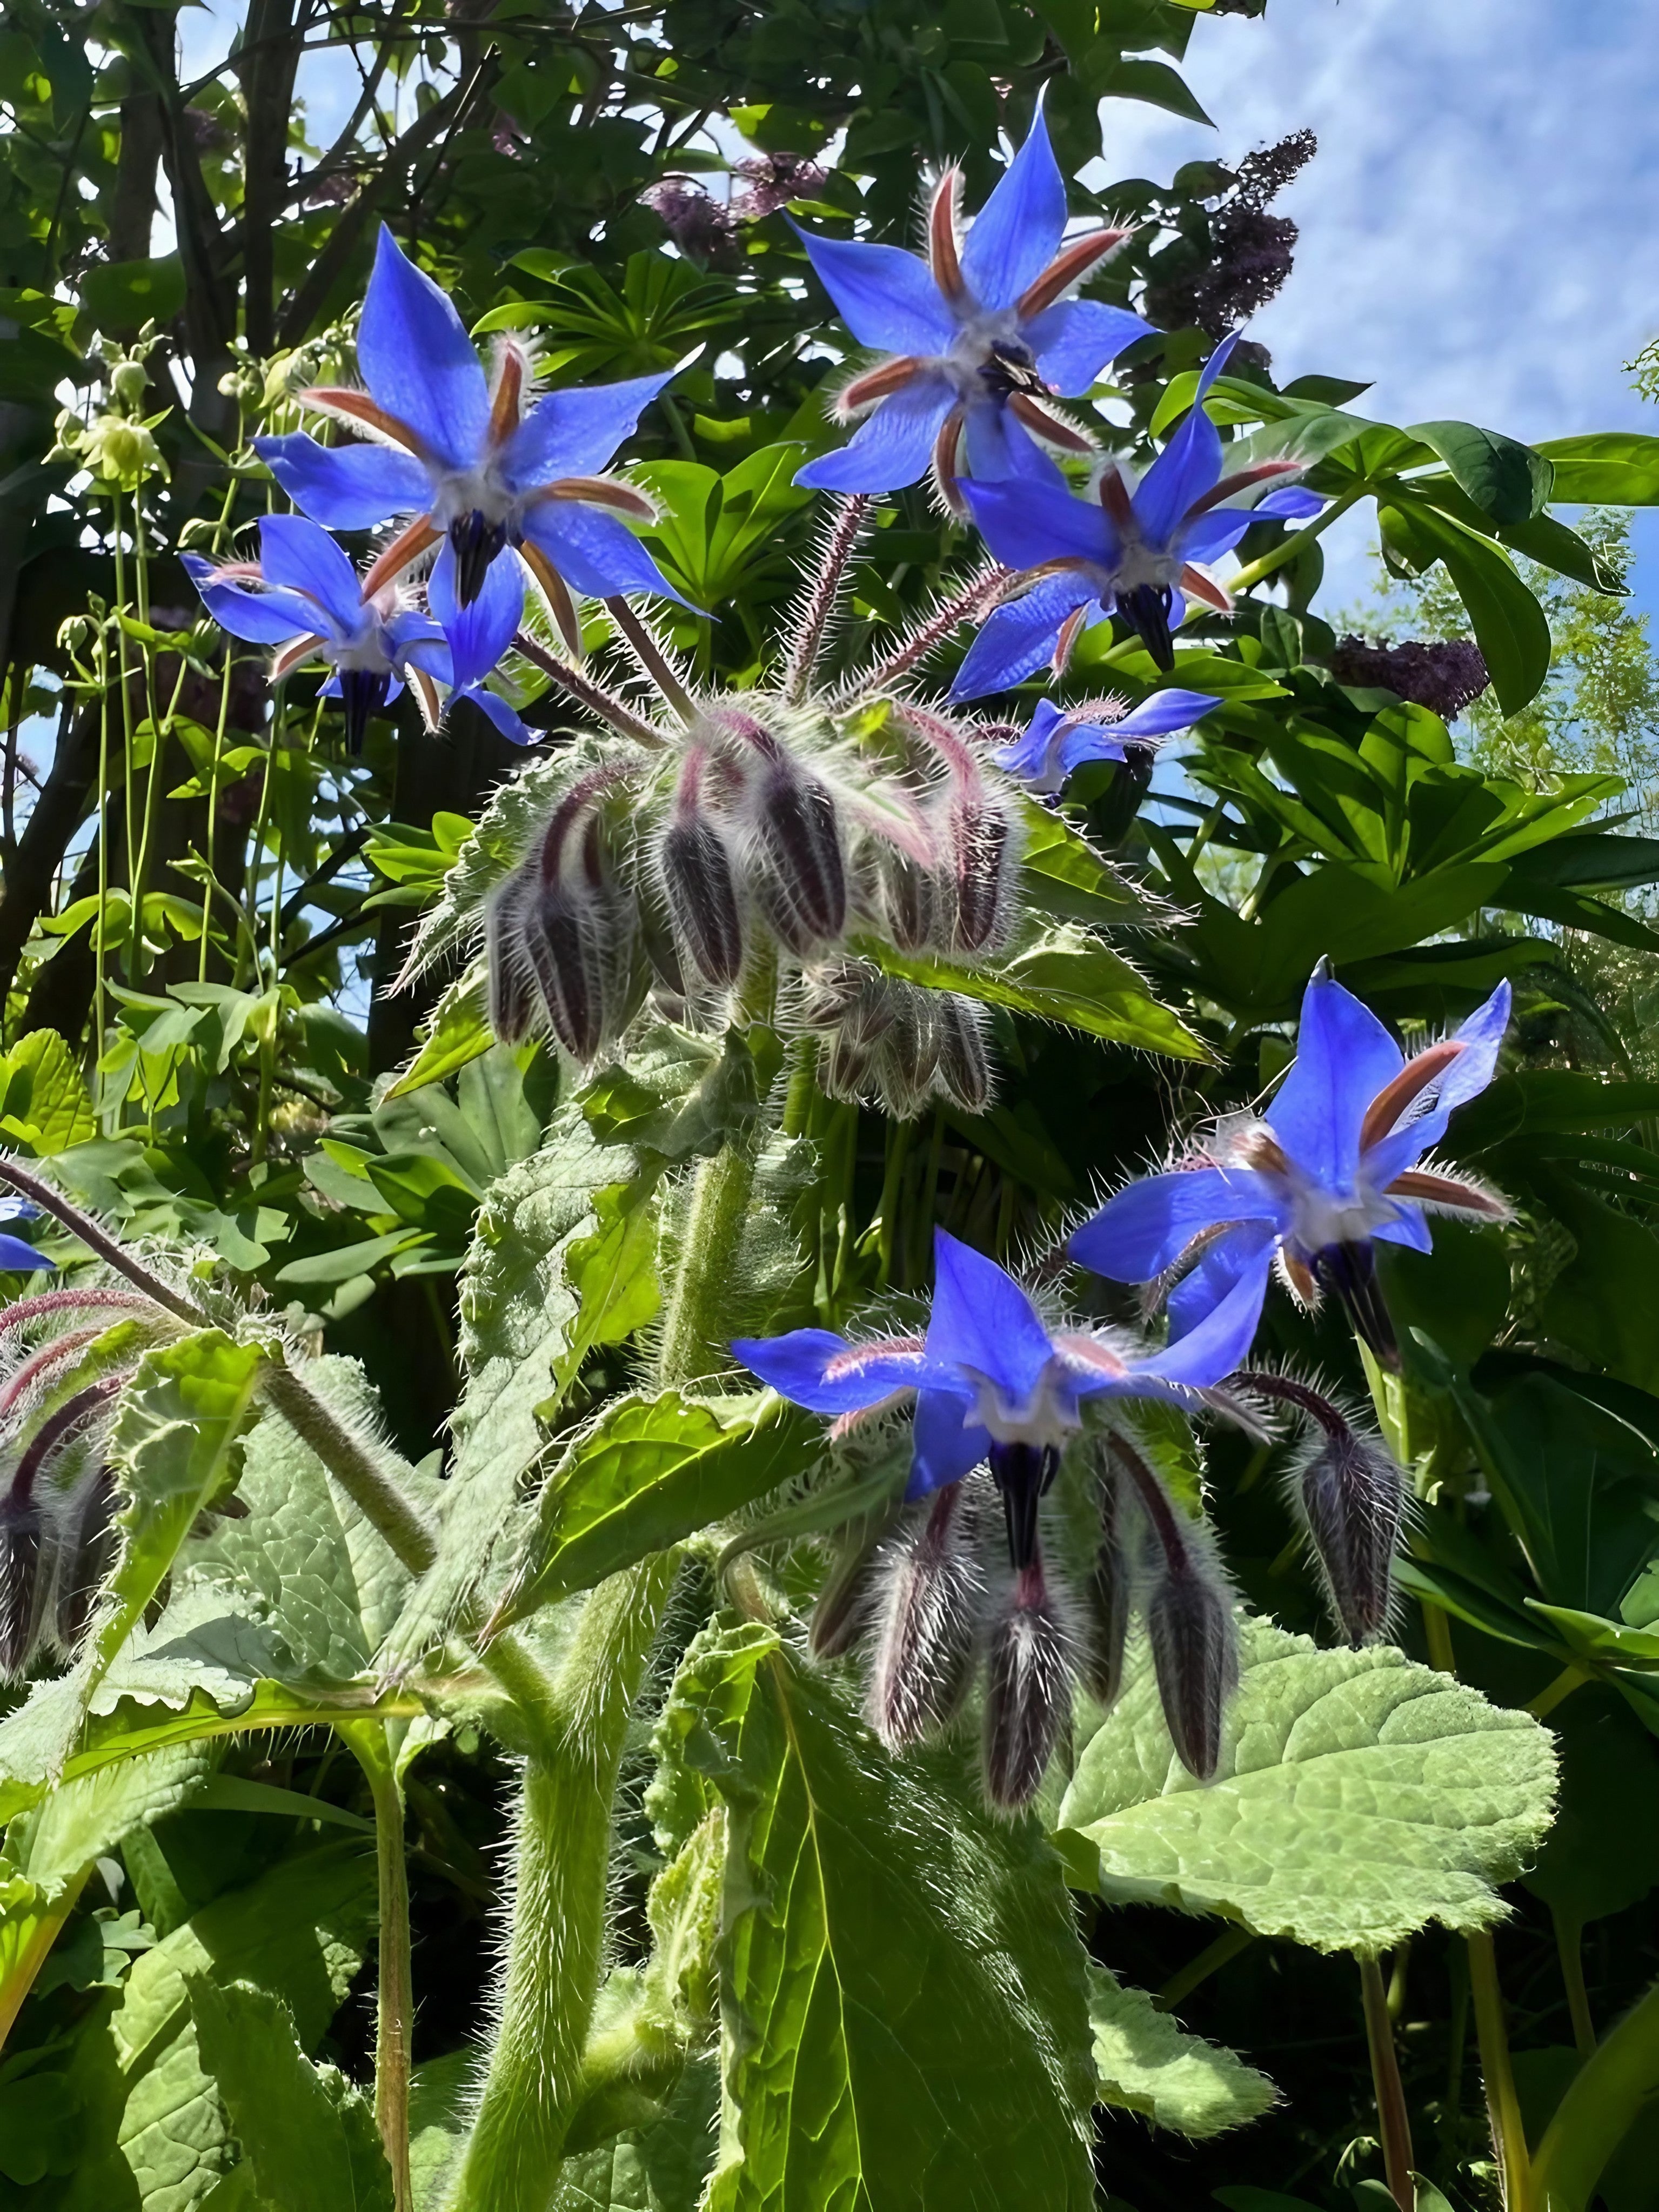 Blue borage bloom surrounded by green foliage